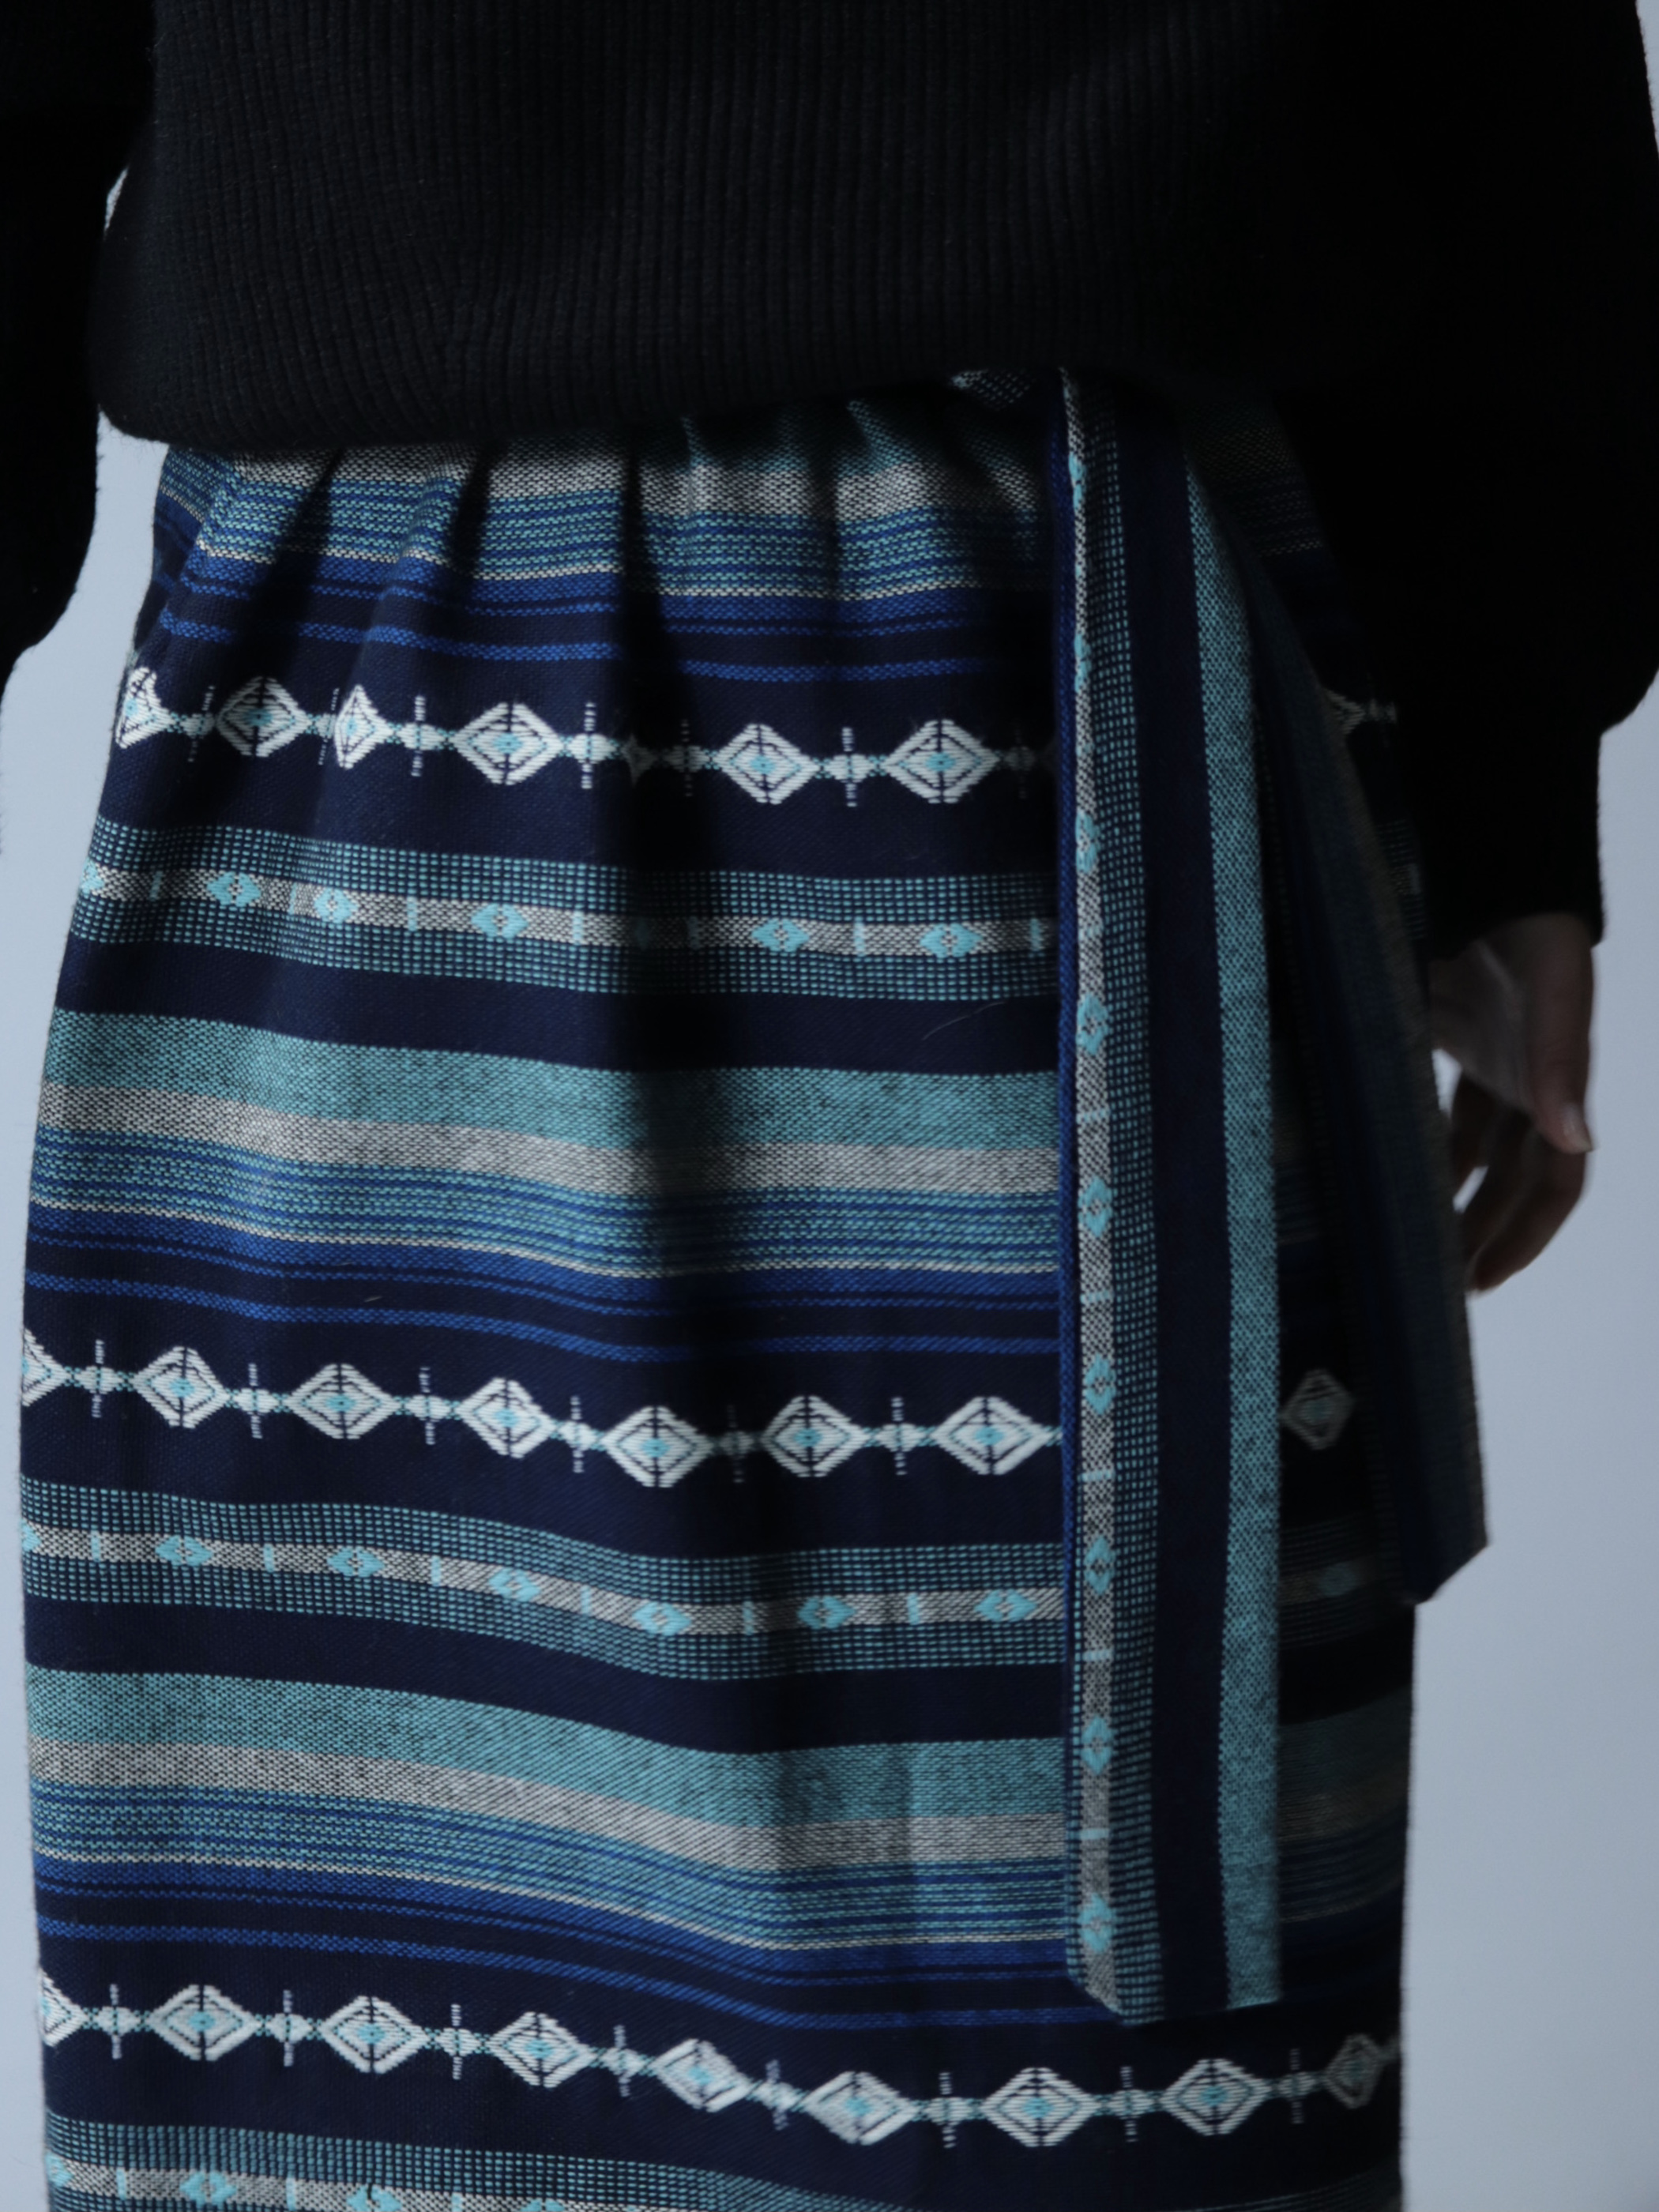 Vintage Mexican pattern skirt